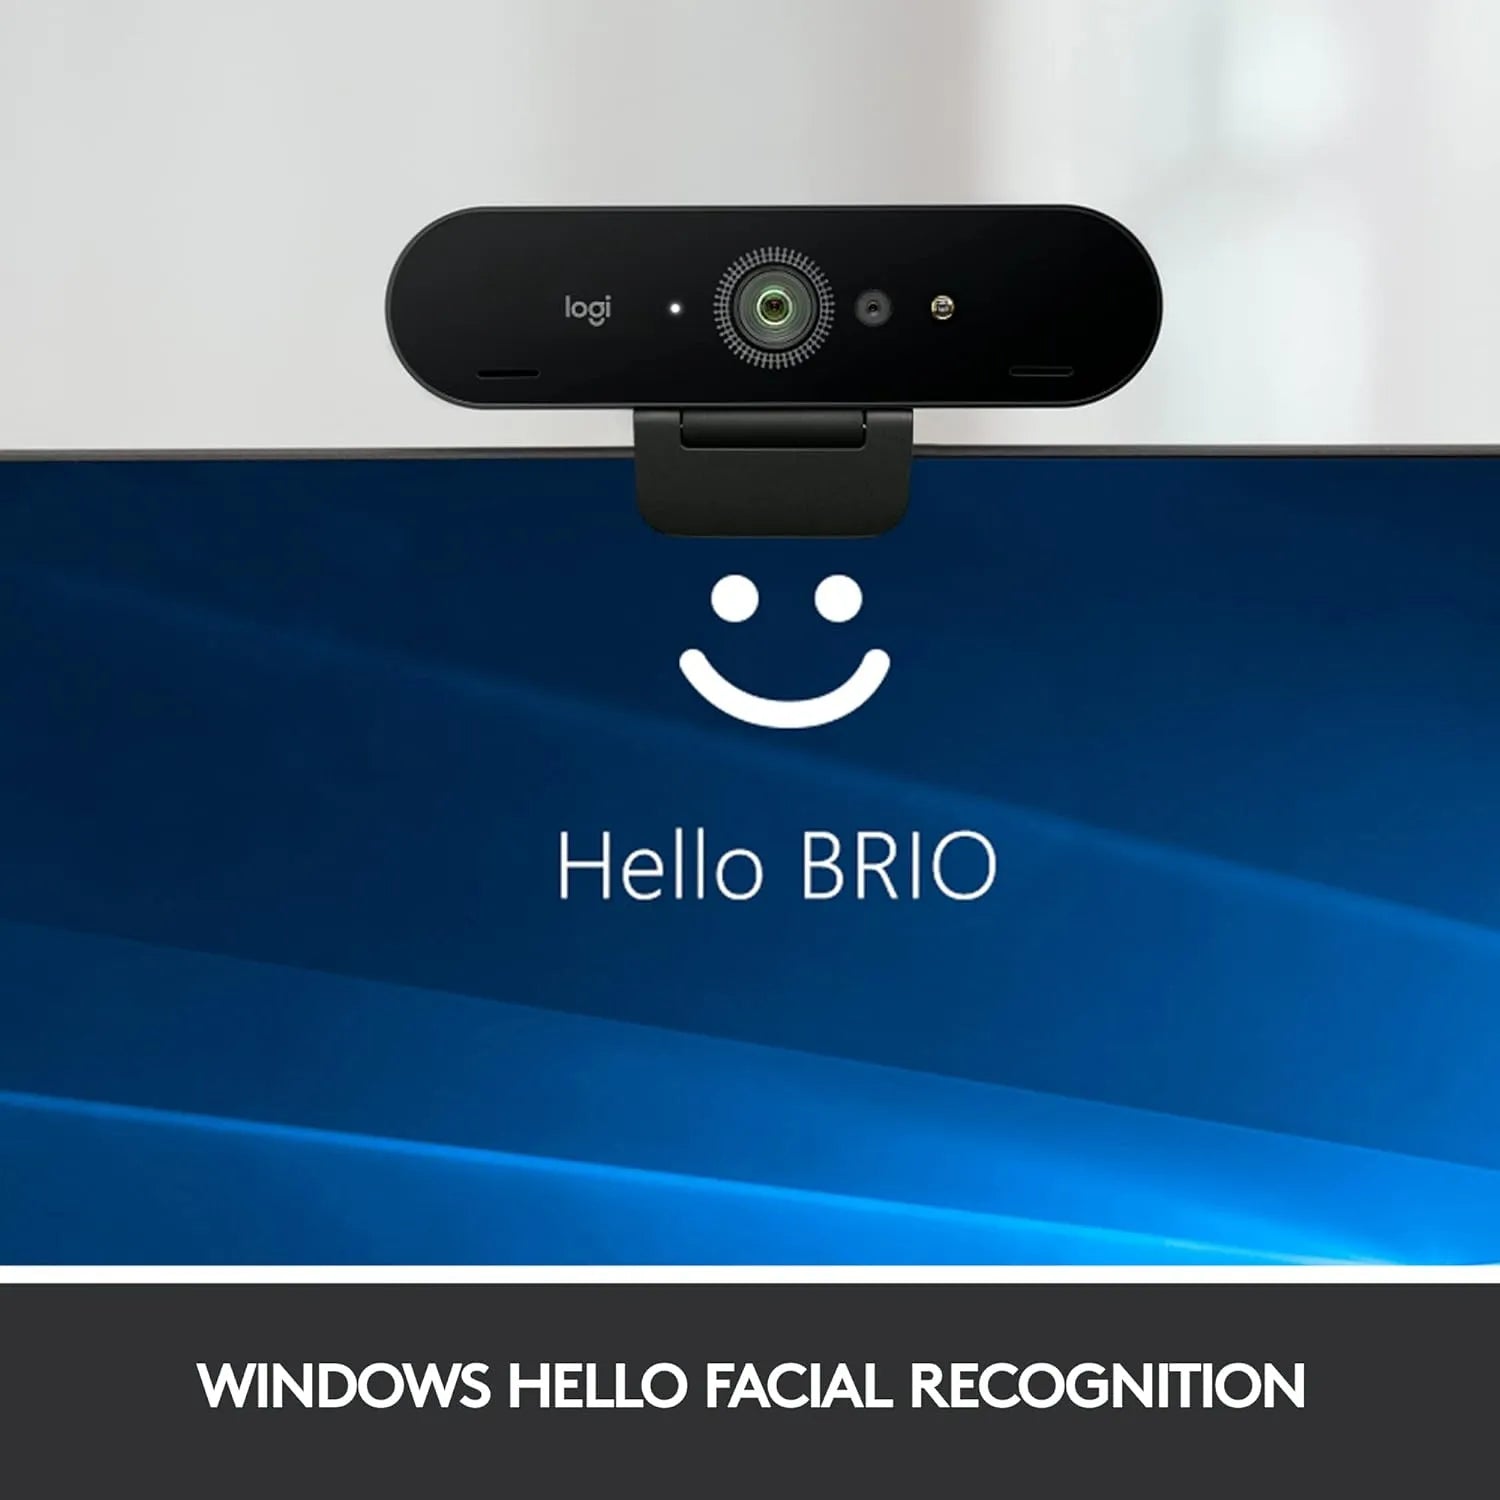 Logitech Brio 4K Stream Edition Webcam with HDR/ Rightlight 3/ and Noise-canceling mics